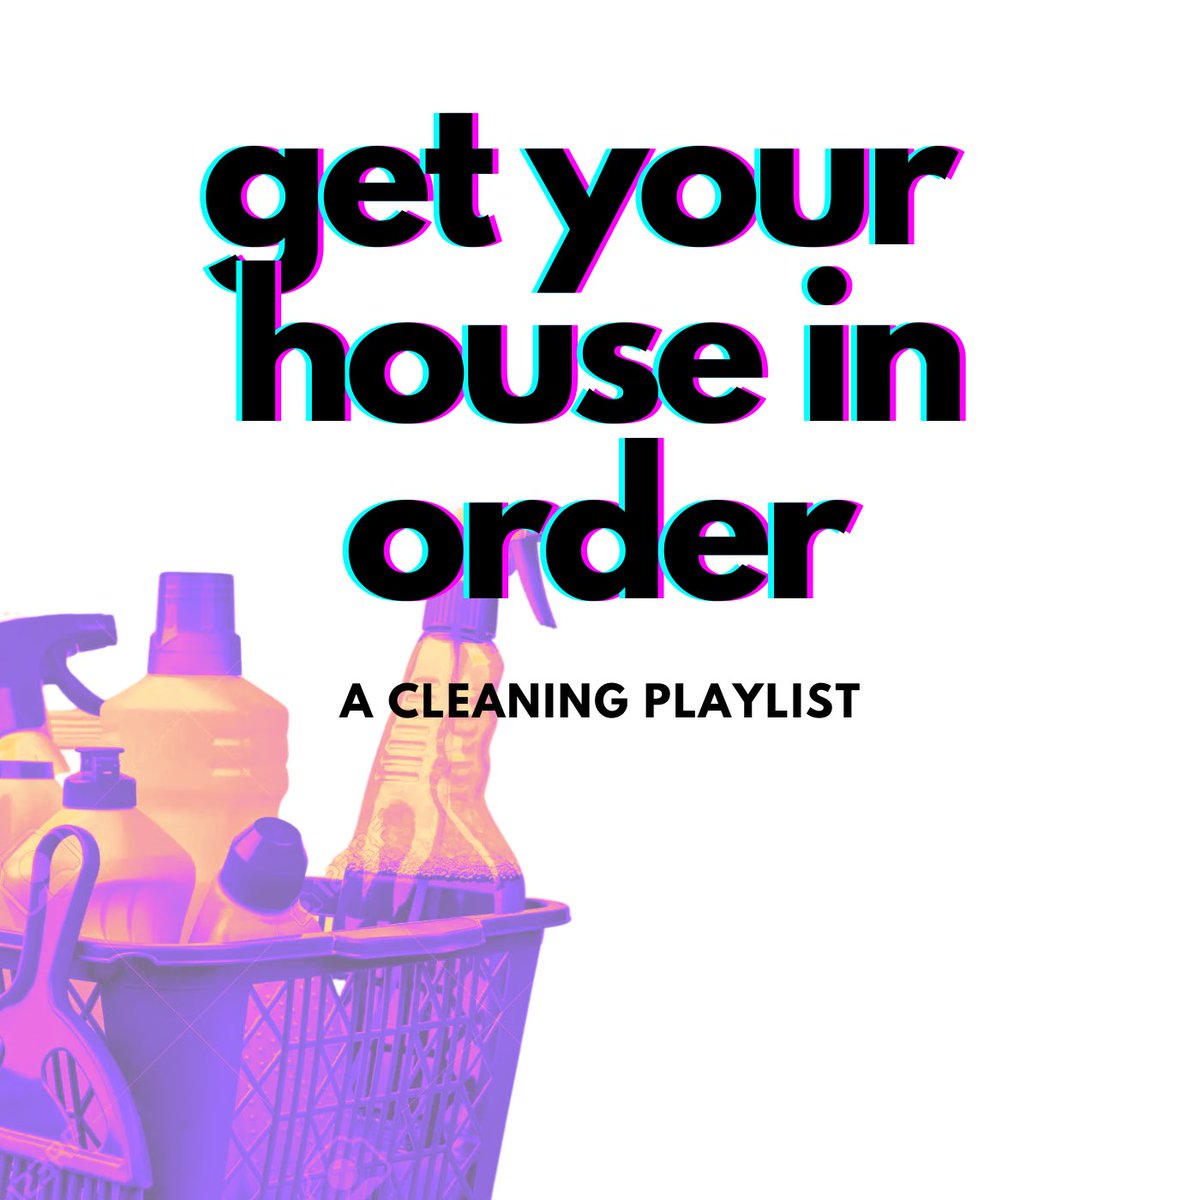 It took a few days, but I got some playlists coming for y'all, starting with your songs from Day 1.

Listen to Get Your House in Order: A Cleaning Playlist: li.sten.to/cleaningplayli…